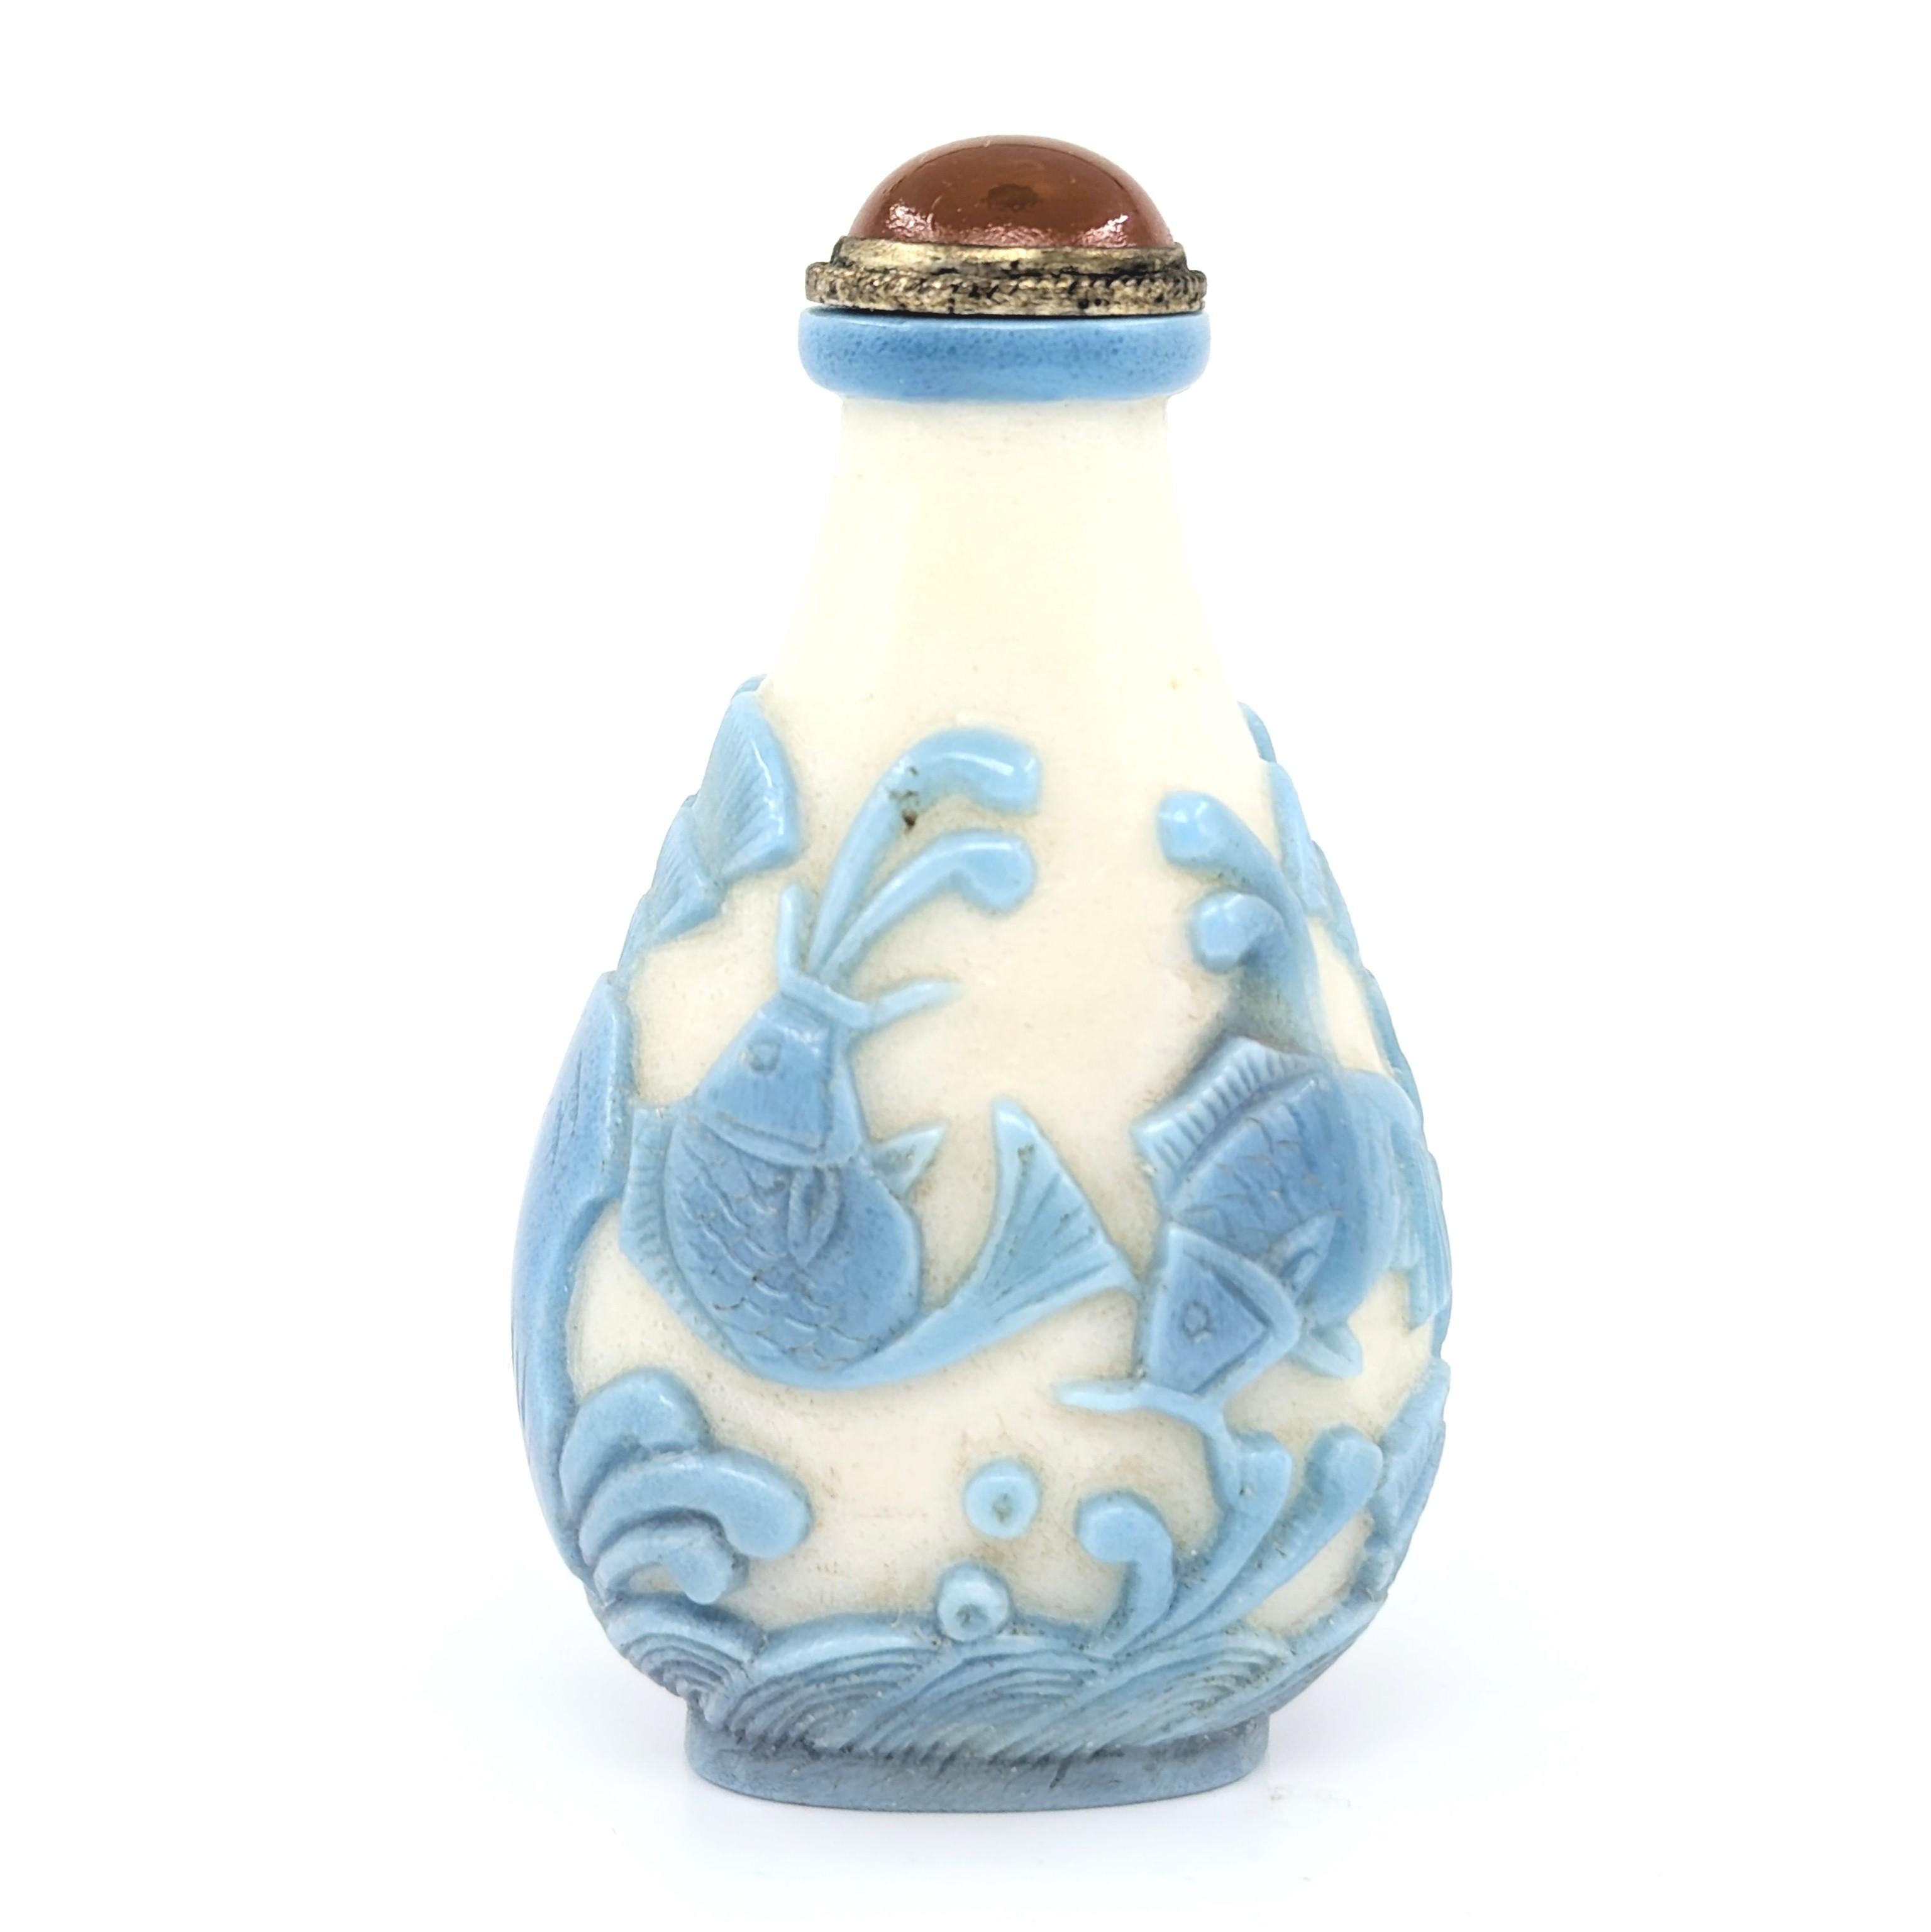 Presenting a splendid antique Chinese snuff bottle, a fine example late Qing dynasty artistry. This piece features a delicate light blue glass overlay, gracefully carved in relief on a milk-white glass ground, creating a serene and harmonious visual